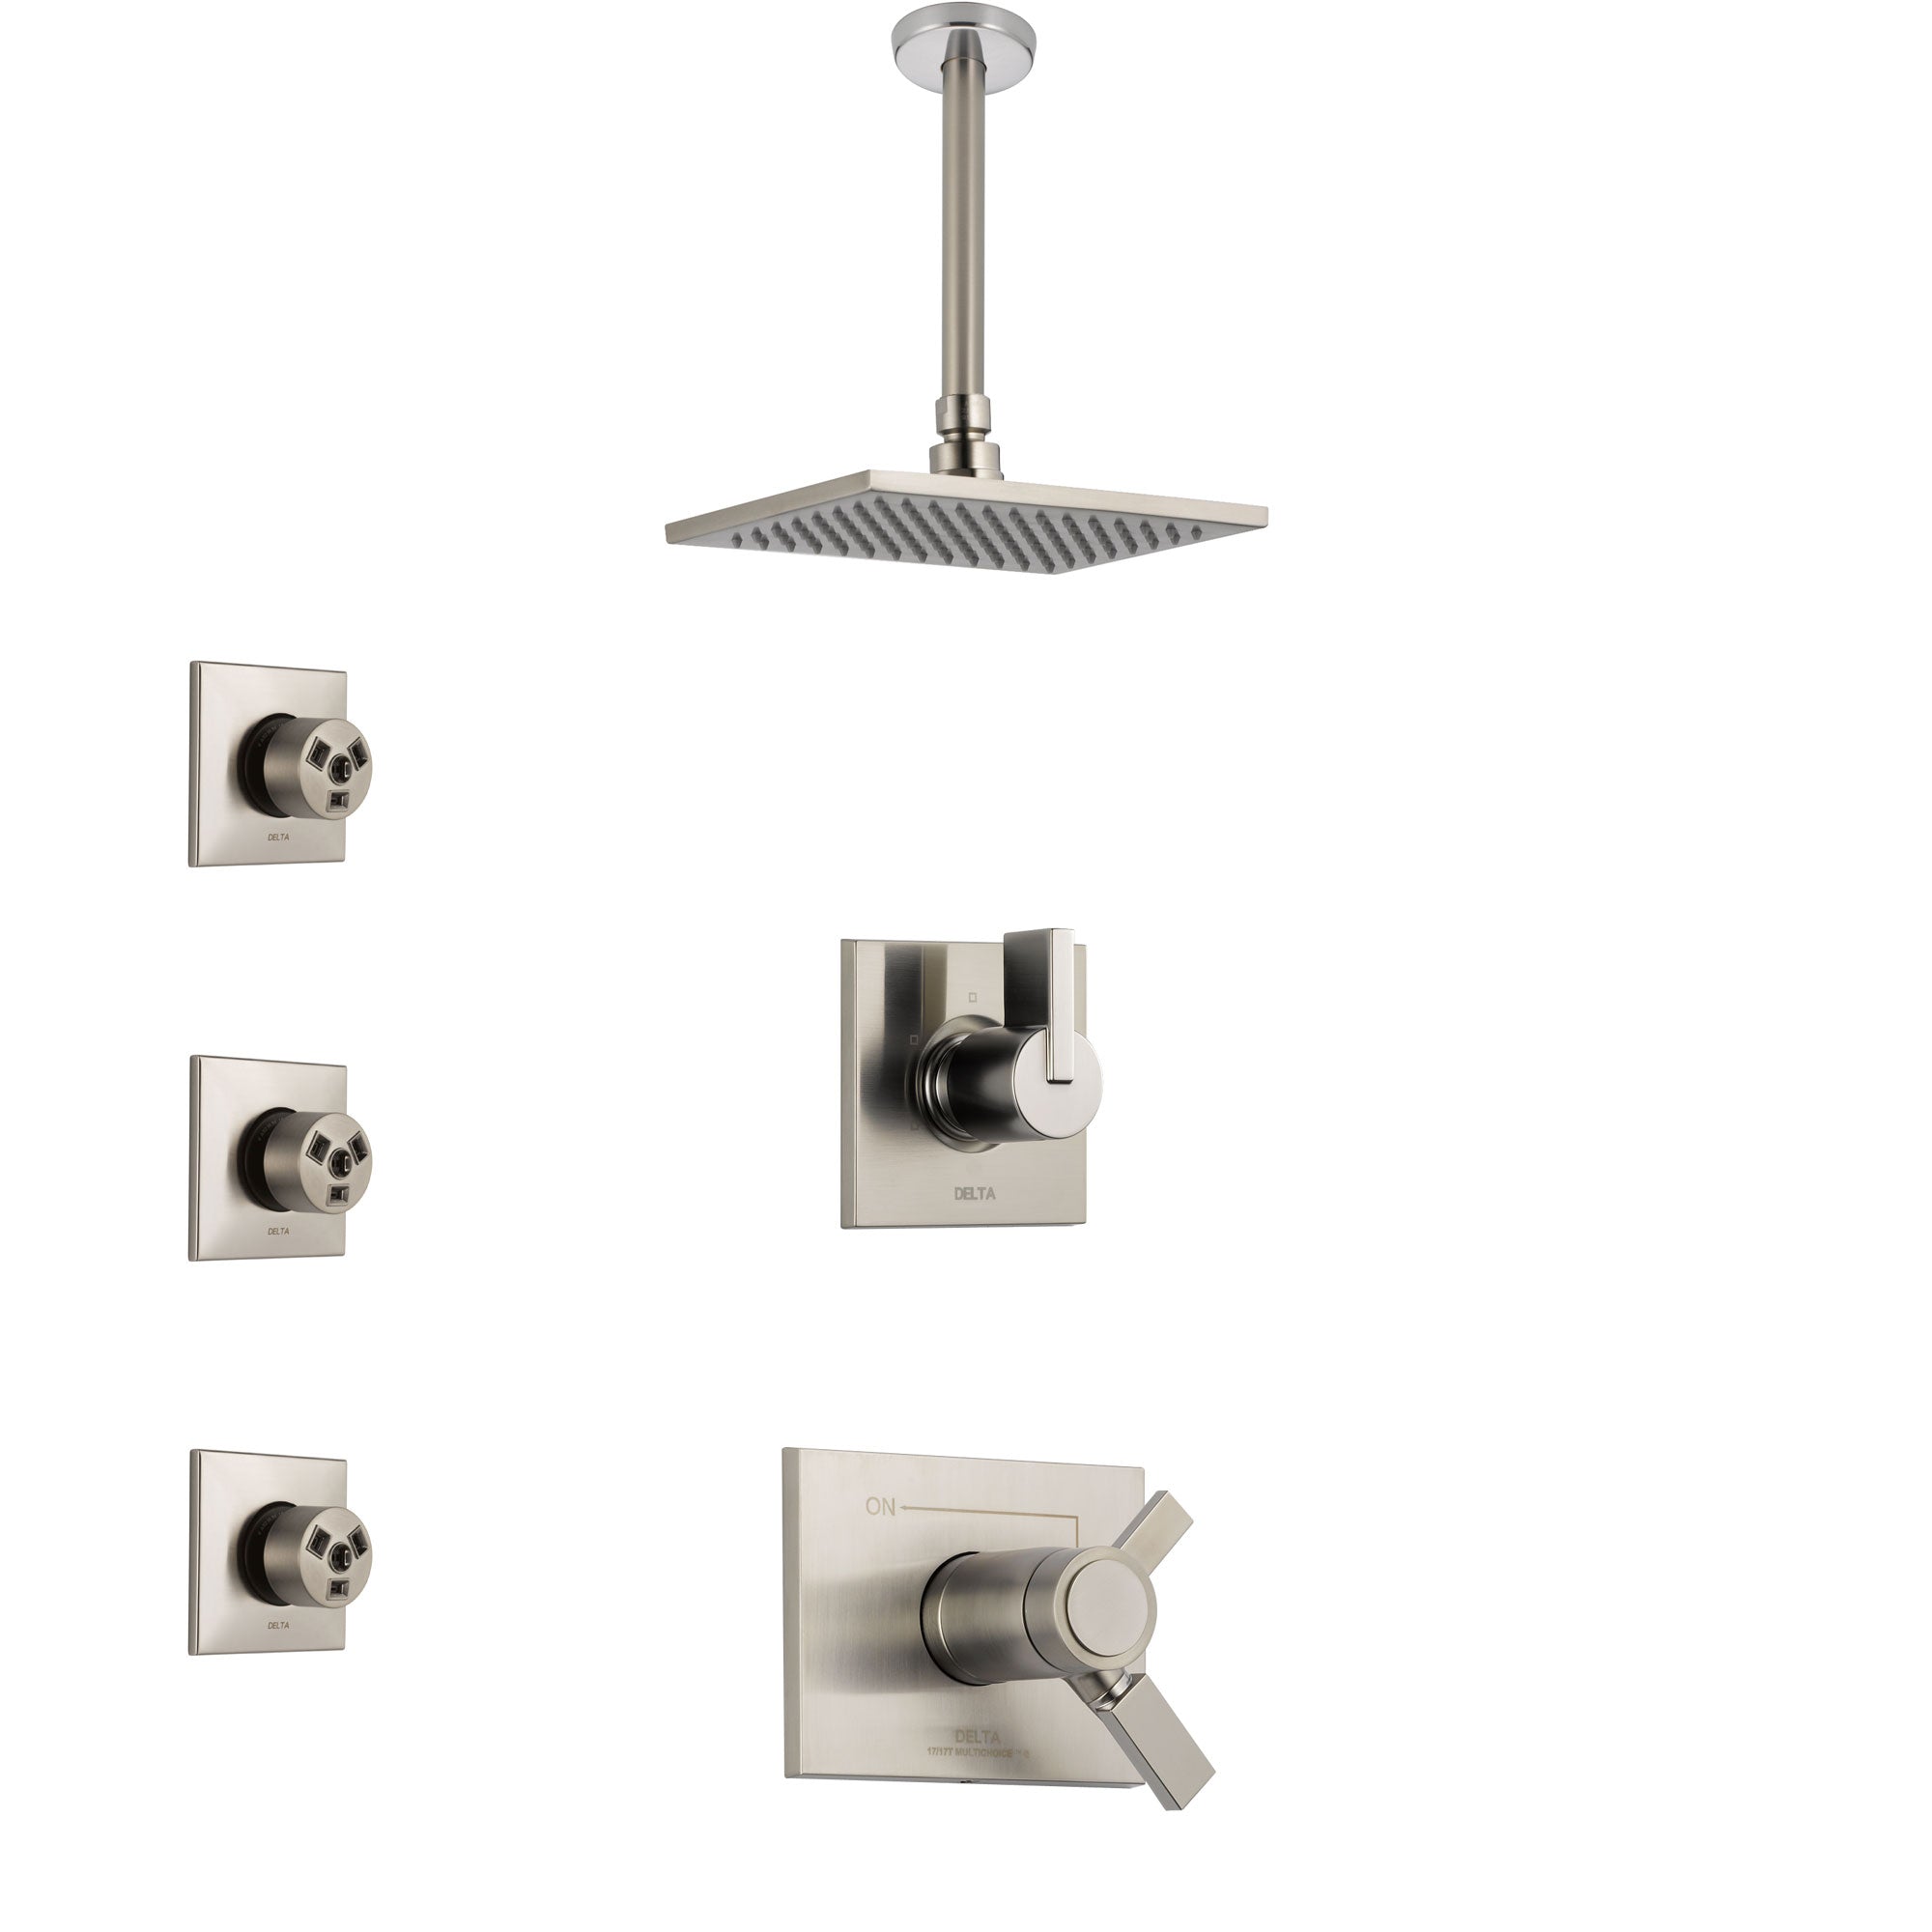 Delta Vero Dual Thermostatic Control Handle Stainless Steel Finish Shower System, Diverter, Ceiling Mount Showerhead, and 3 Body Sprays SS17T531SS4